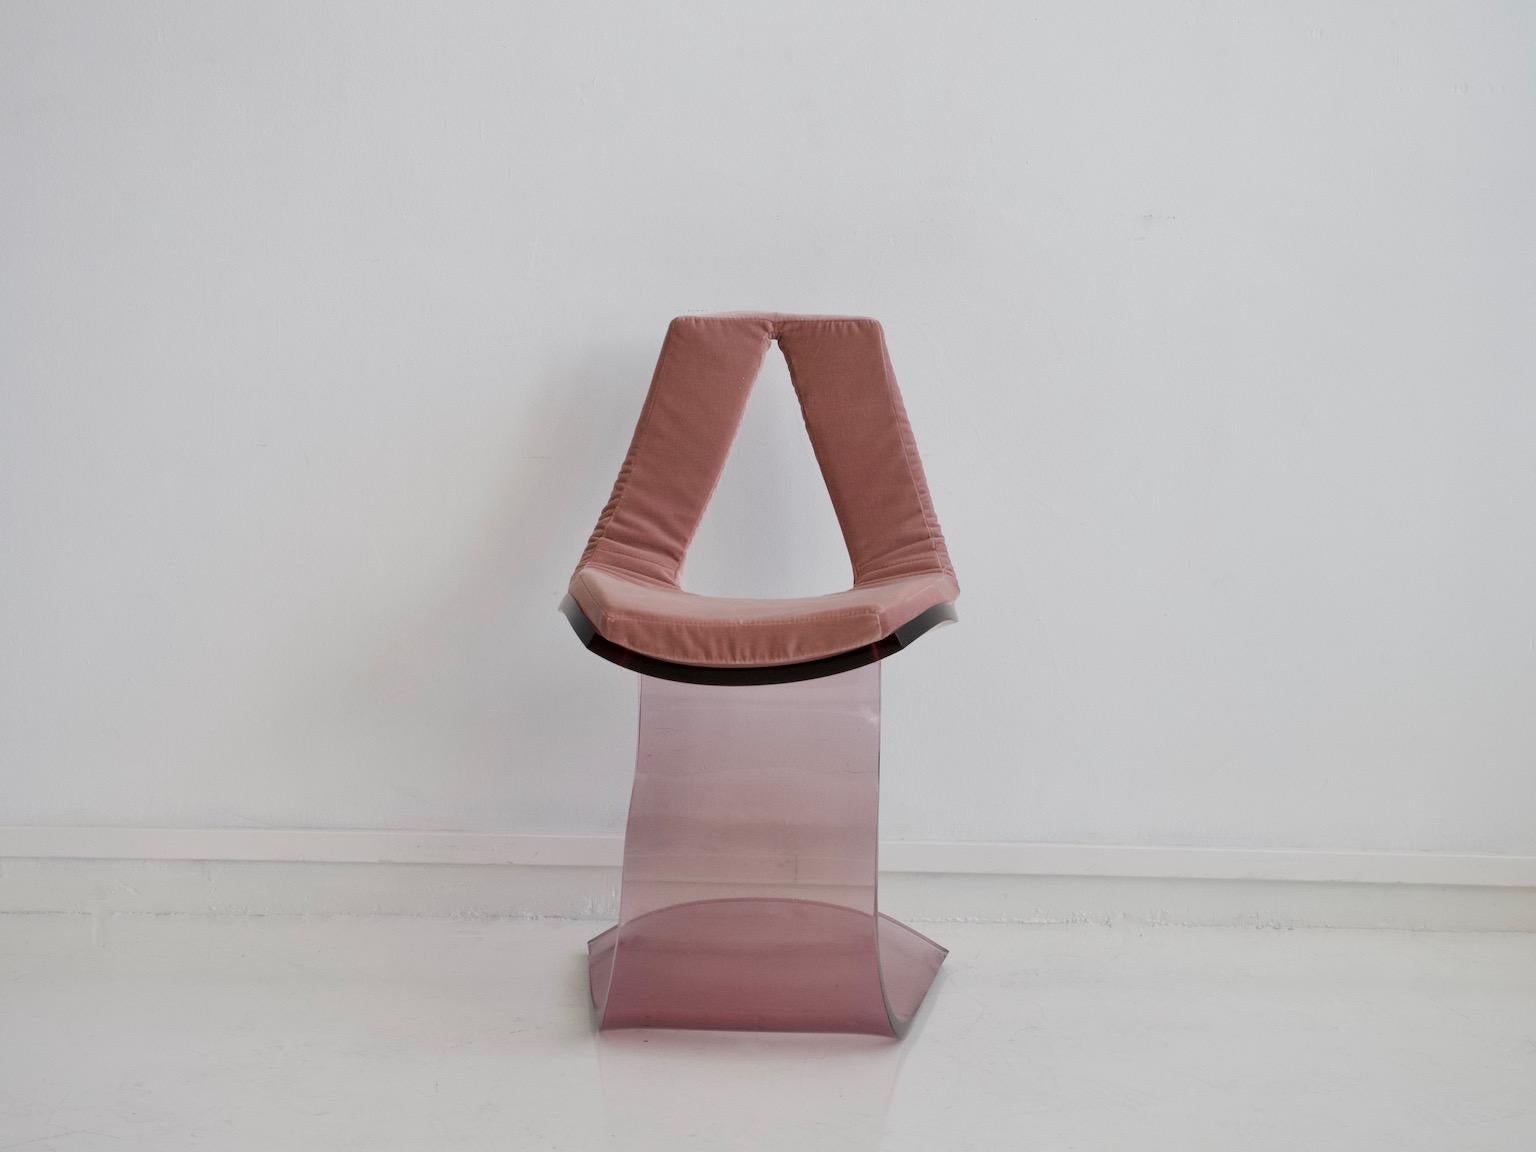 Sculptural chair made of tinted Lucite with new pink velvet upholstery. This 